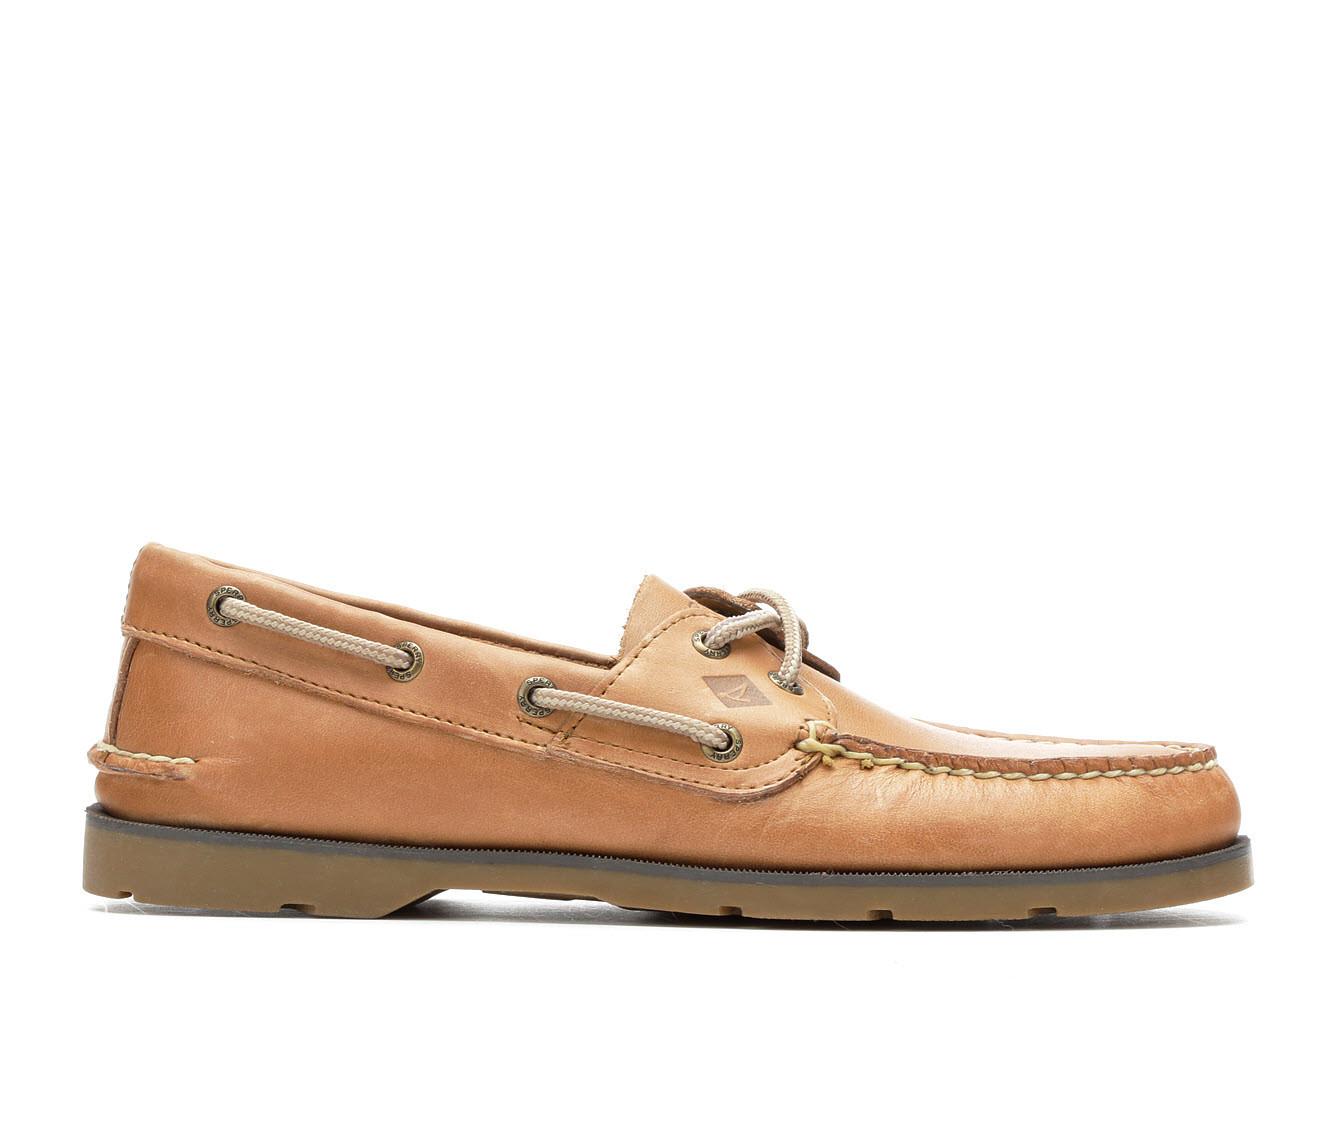 Sperry, Change or replace your shoe strings 